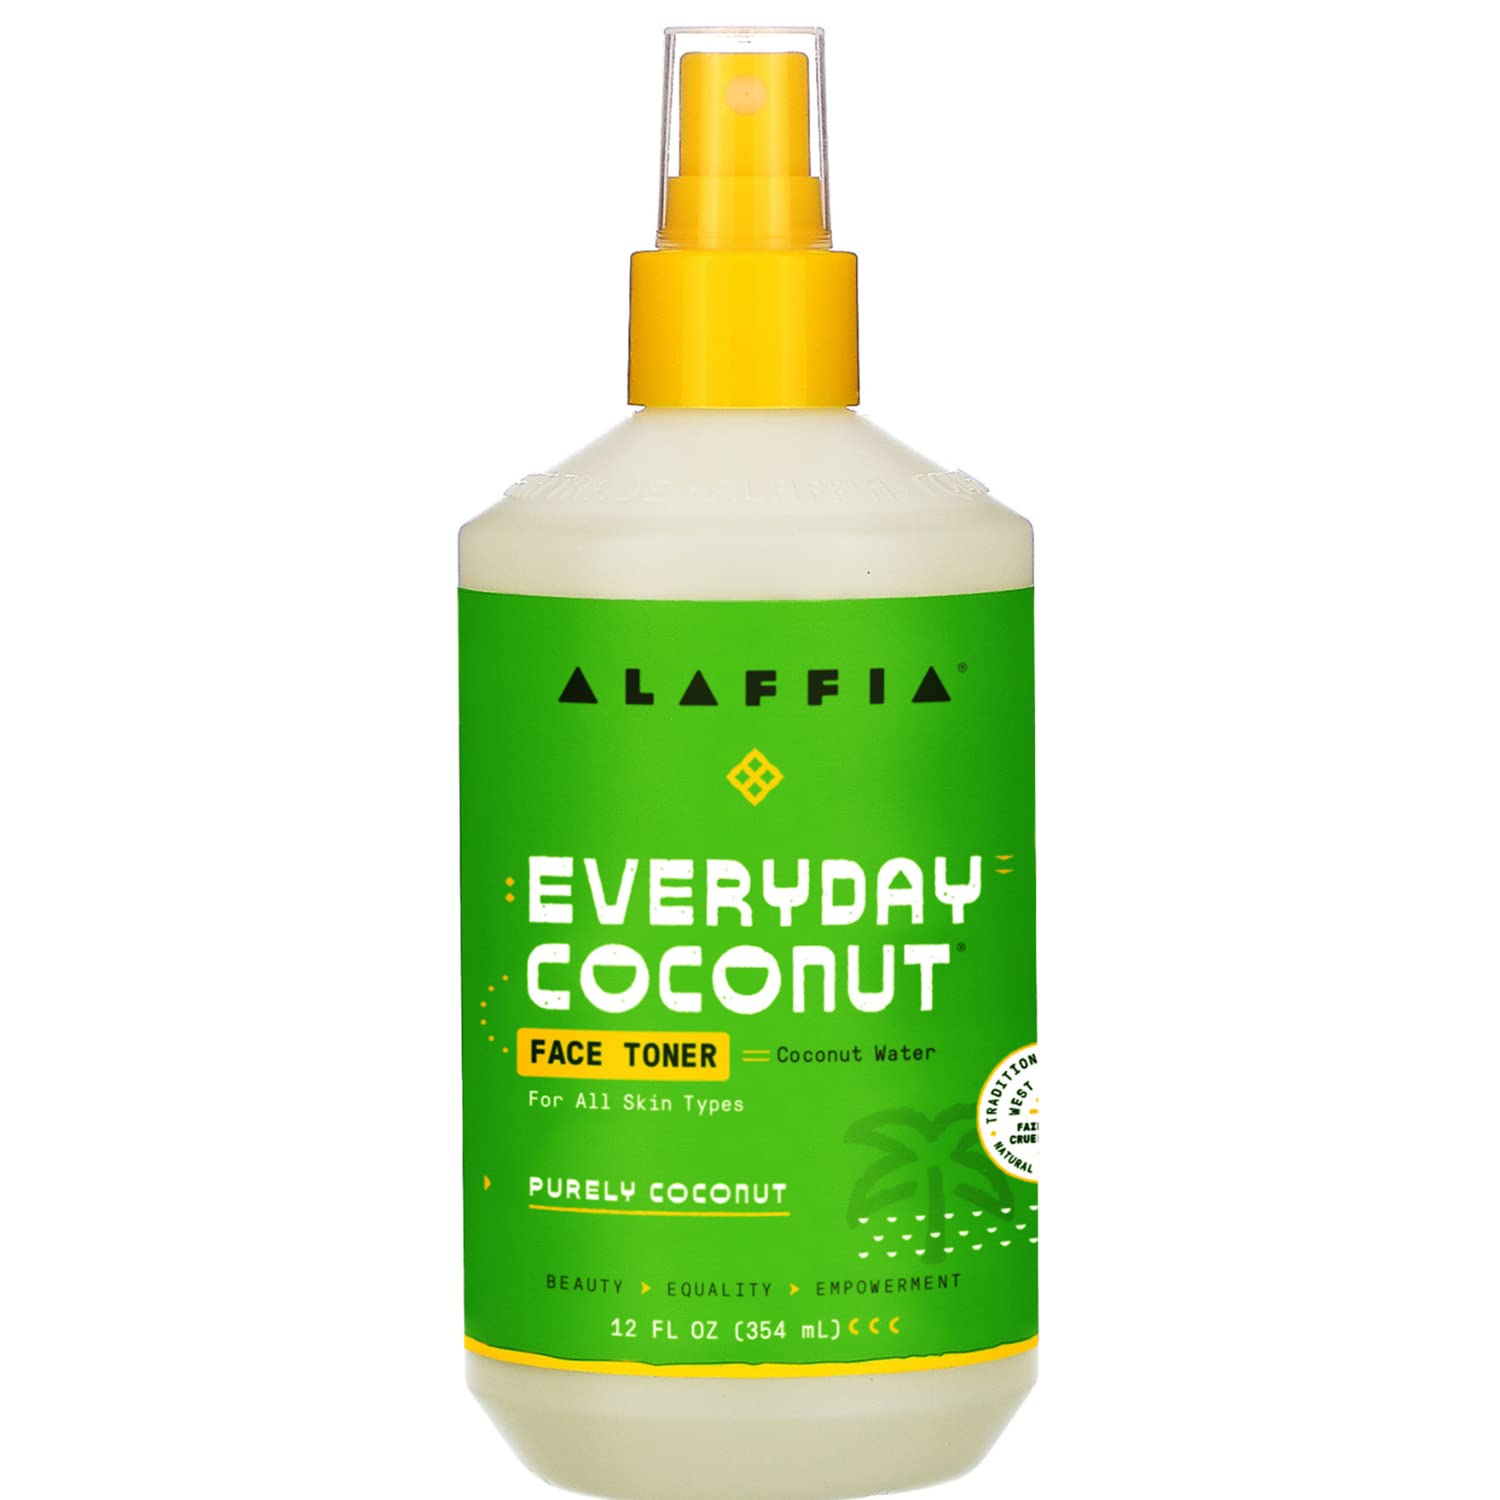 Everyday Coconut, Face Toner, Purely Coconut, Normal to Dry Skin, 12 fl oz (354 ml)